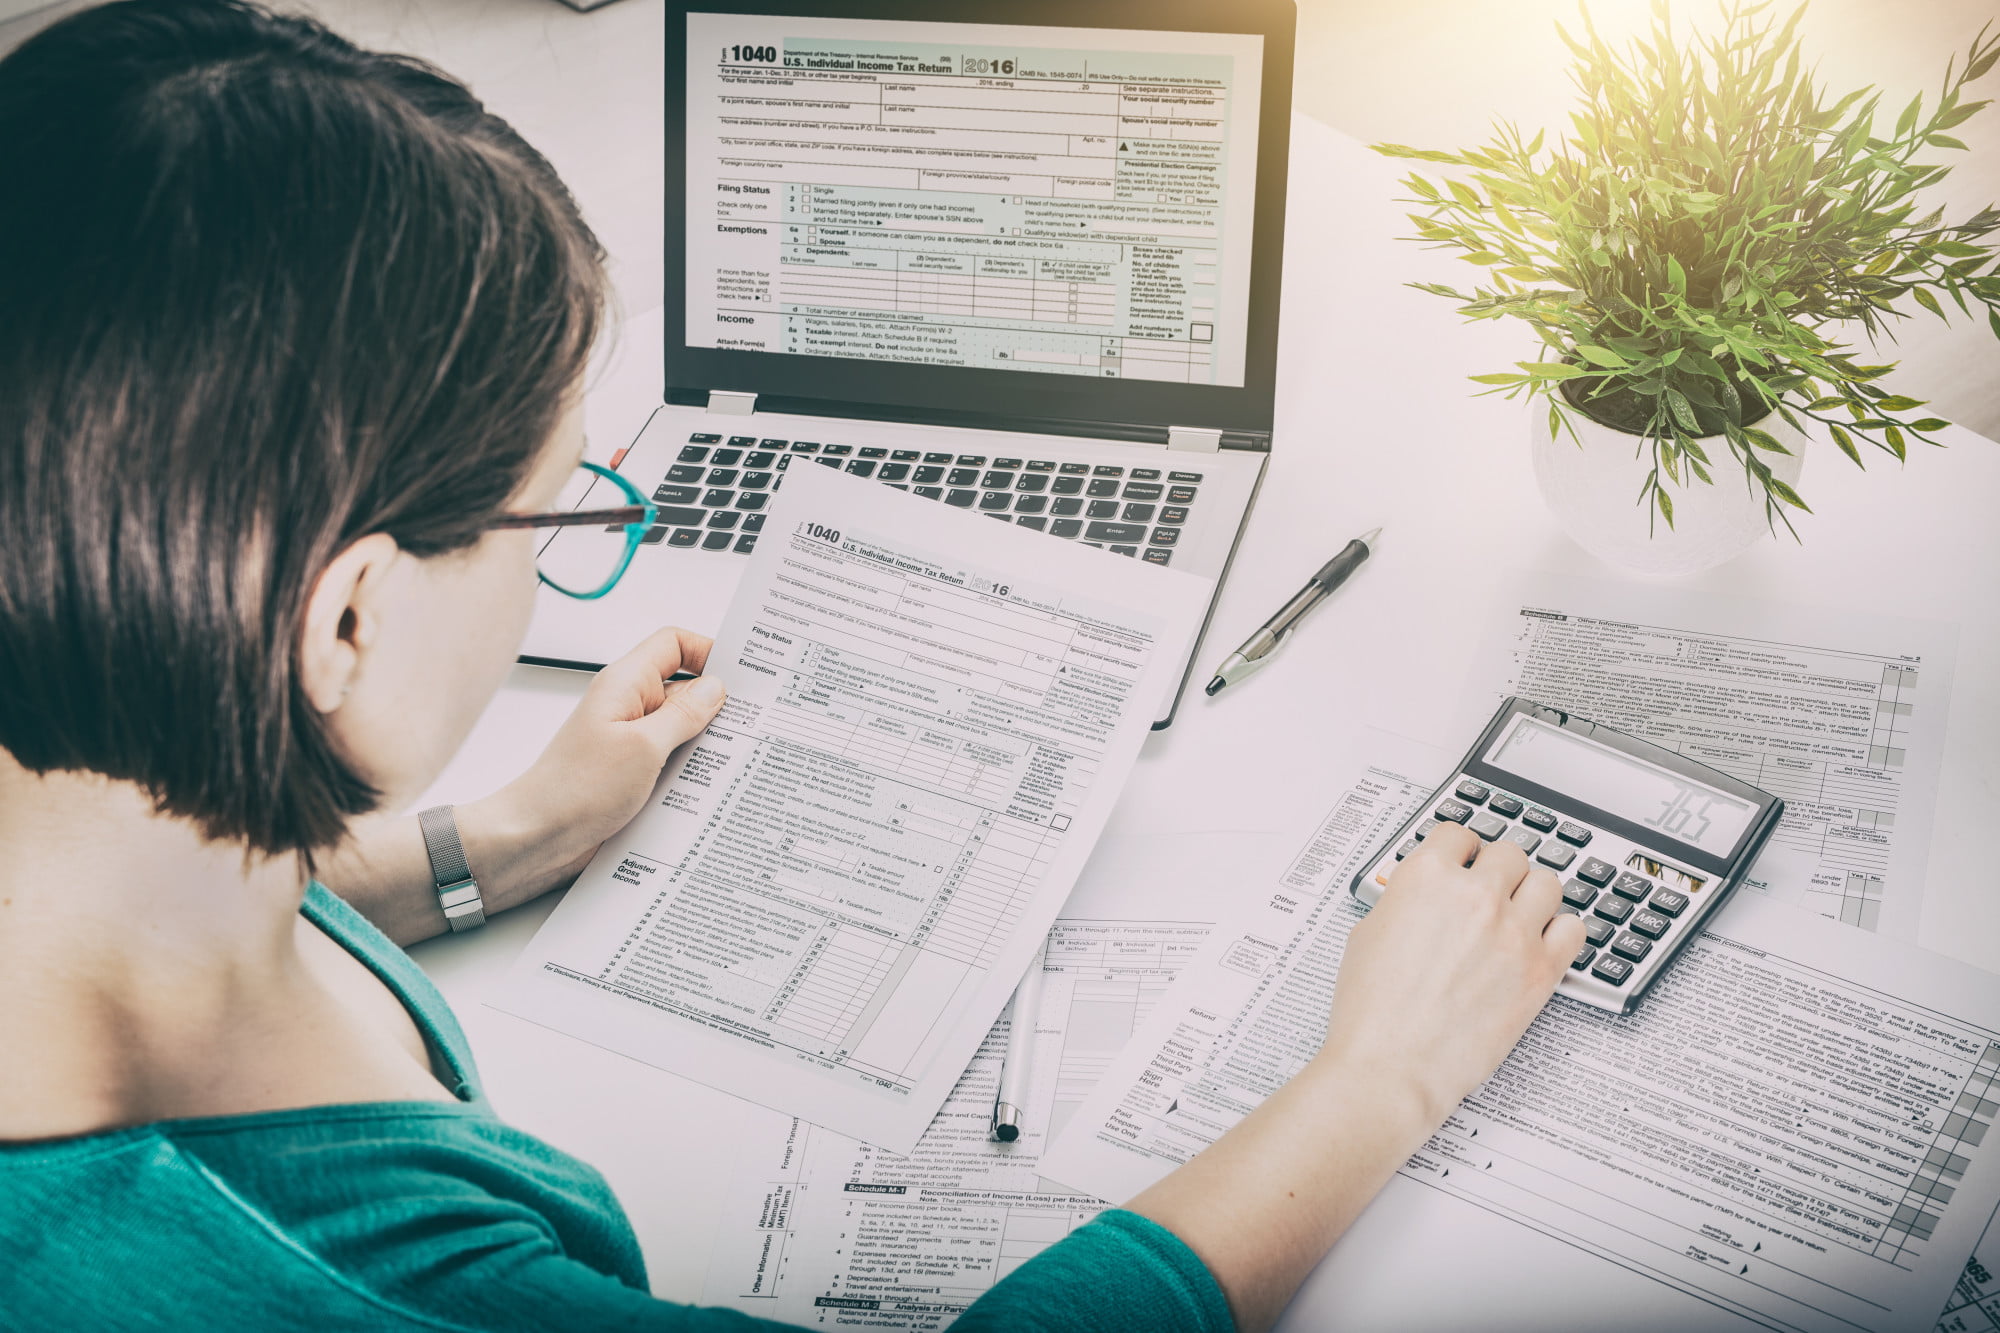 What is considered early tax filing? Find out when the IRS officially starts accepting returns and the benefits of filing taxes early.What is considered early tax filing? Find out when the IRS officially starts accepting returns and the benefits of filing taxes early.